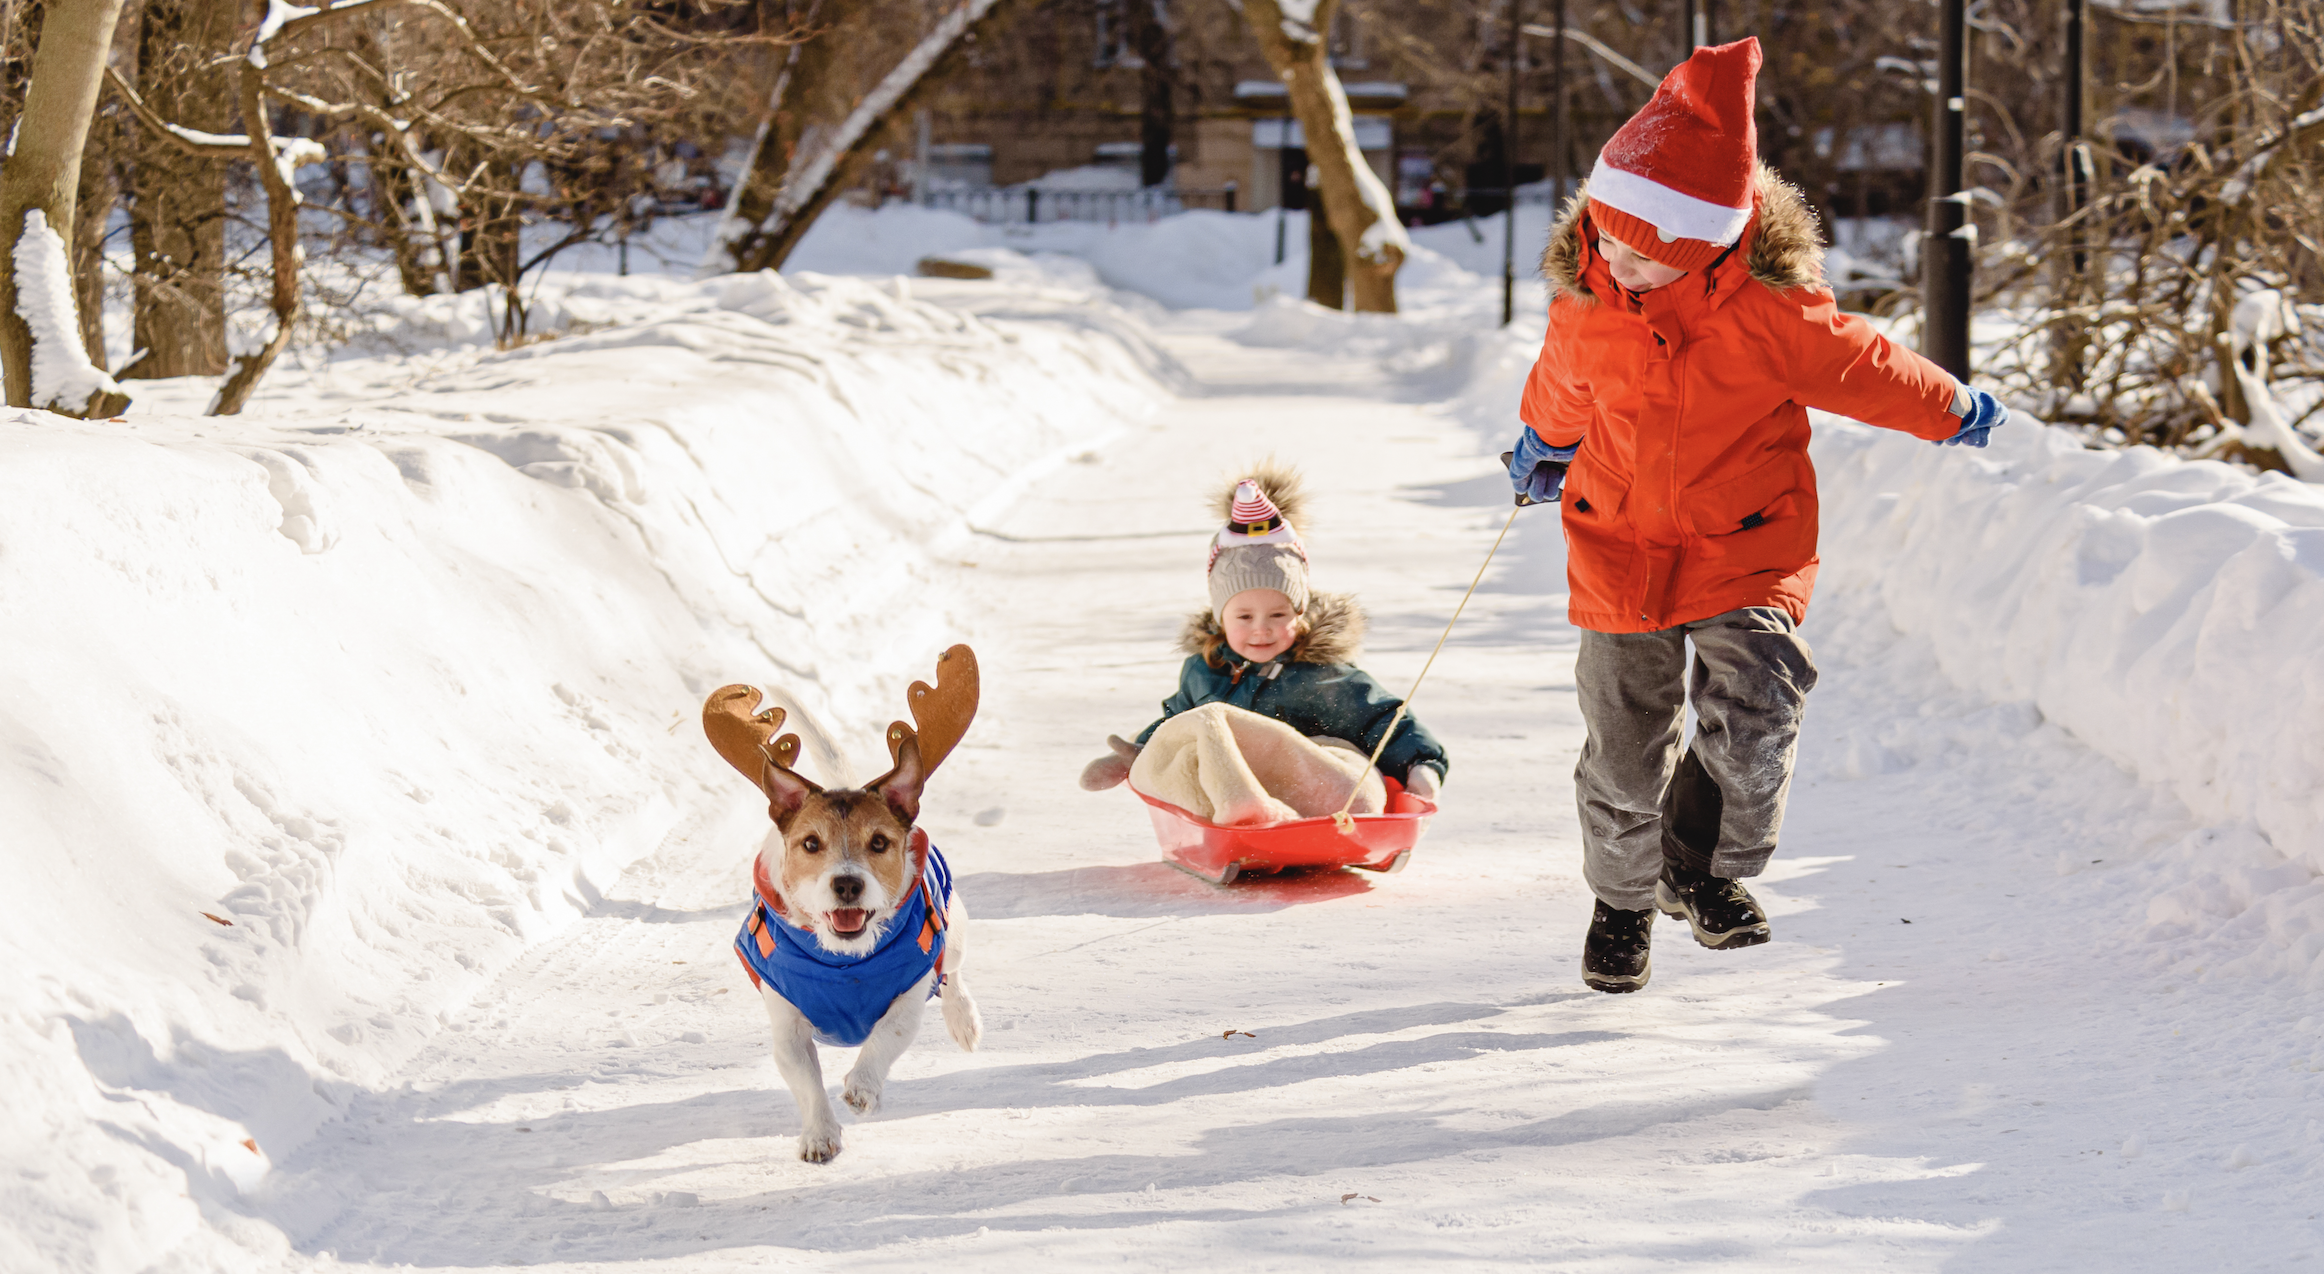 9 best snow toys kids will love playing with this winter - TODAY